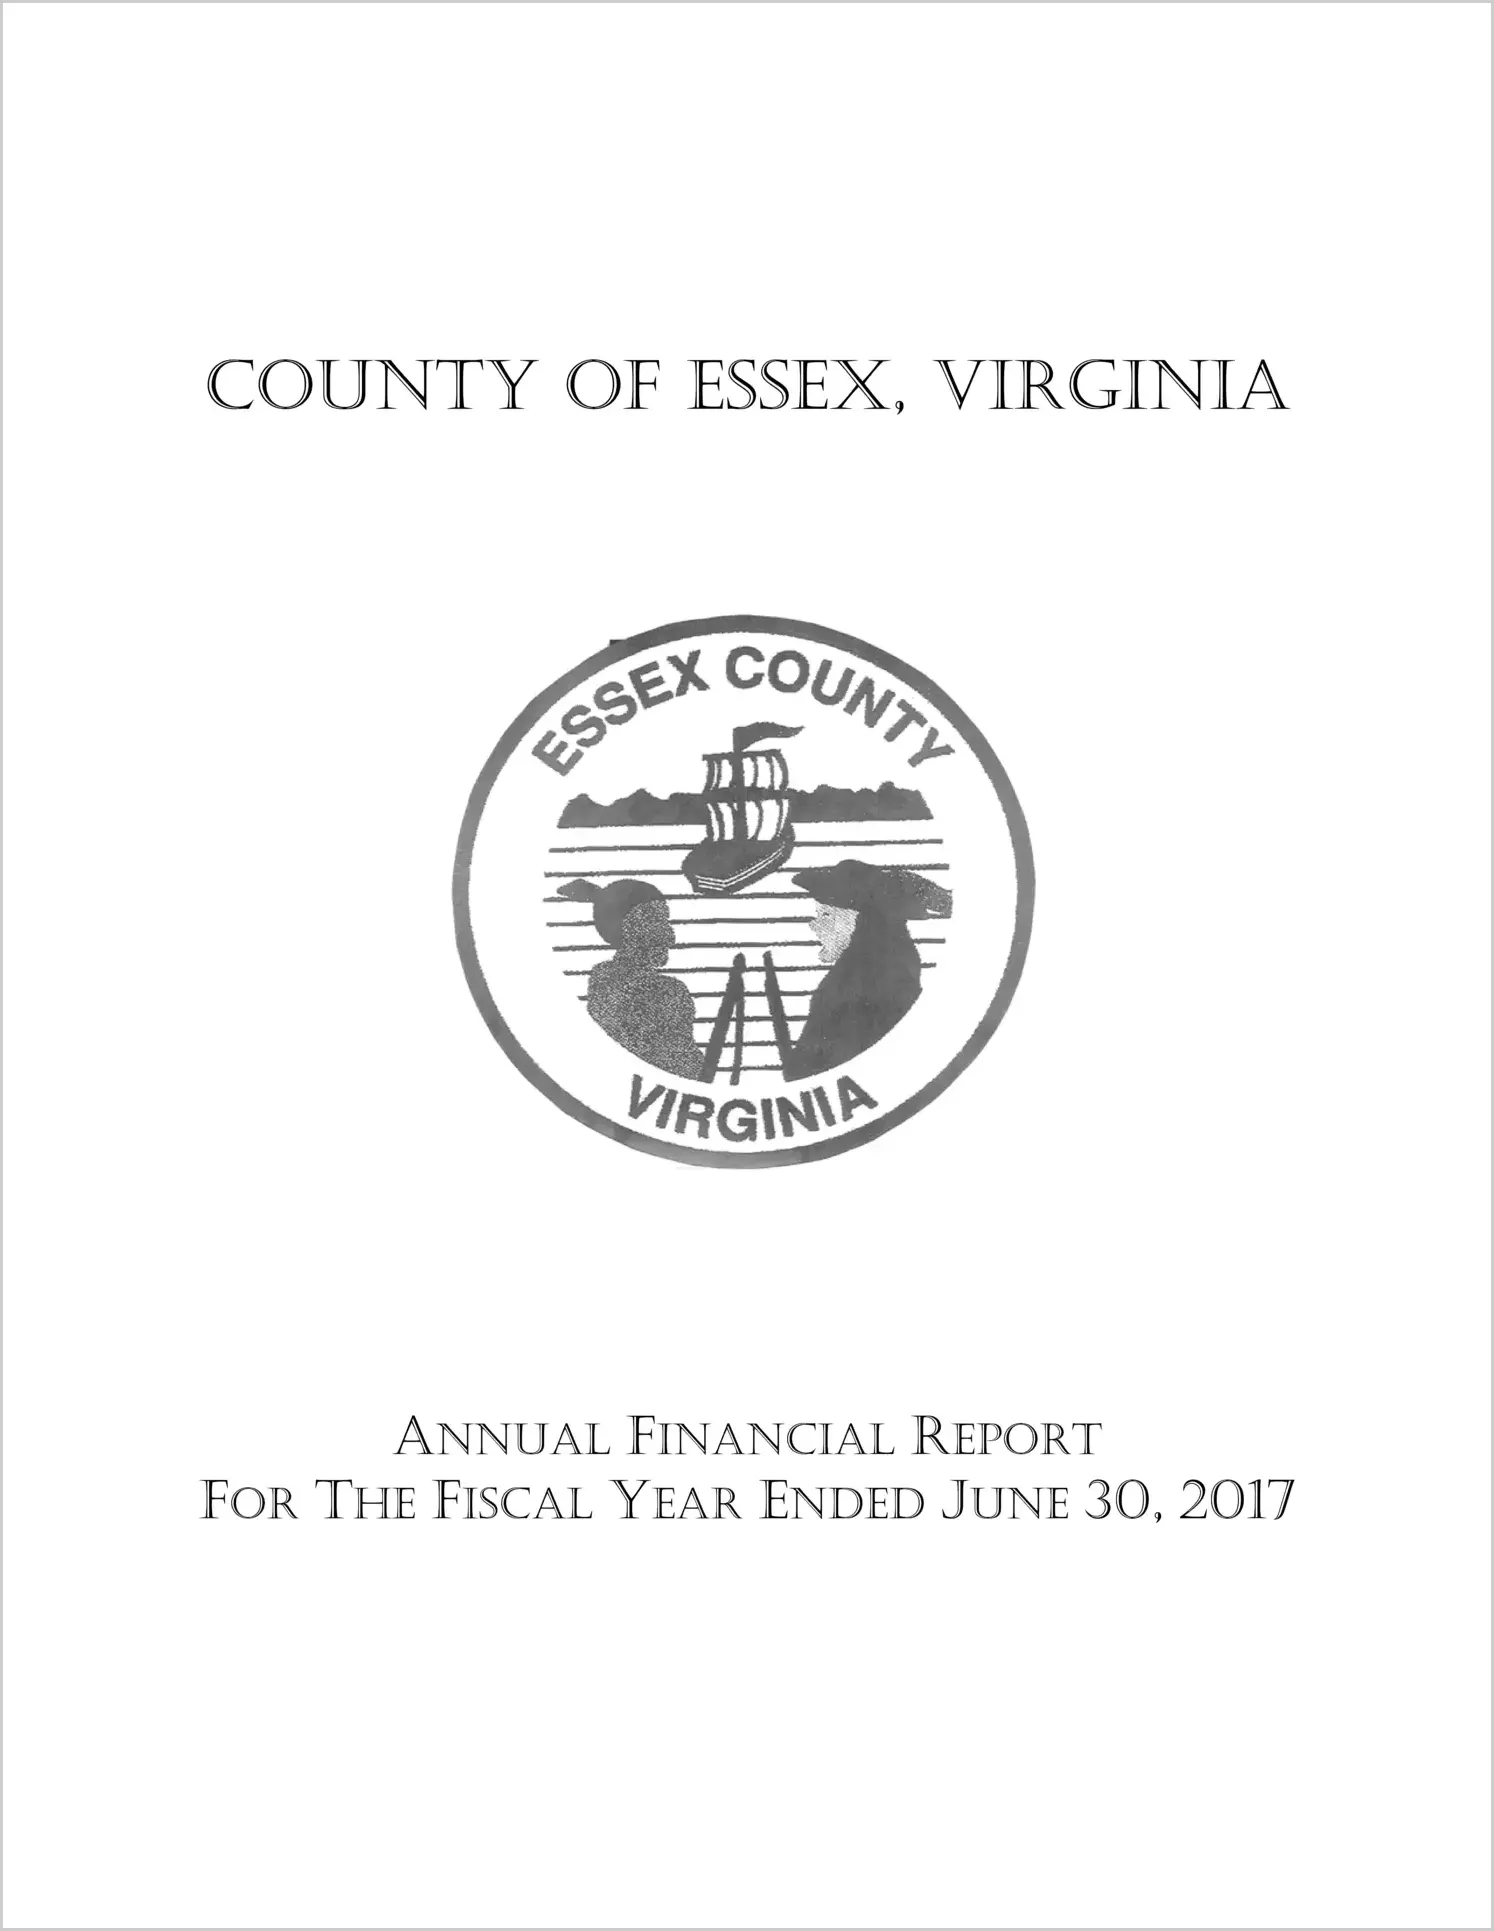 2017 Annual Financial Report for County of Essex